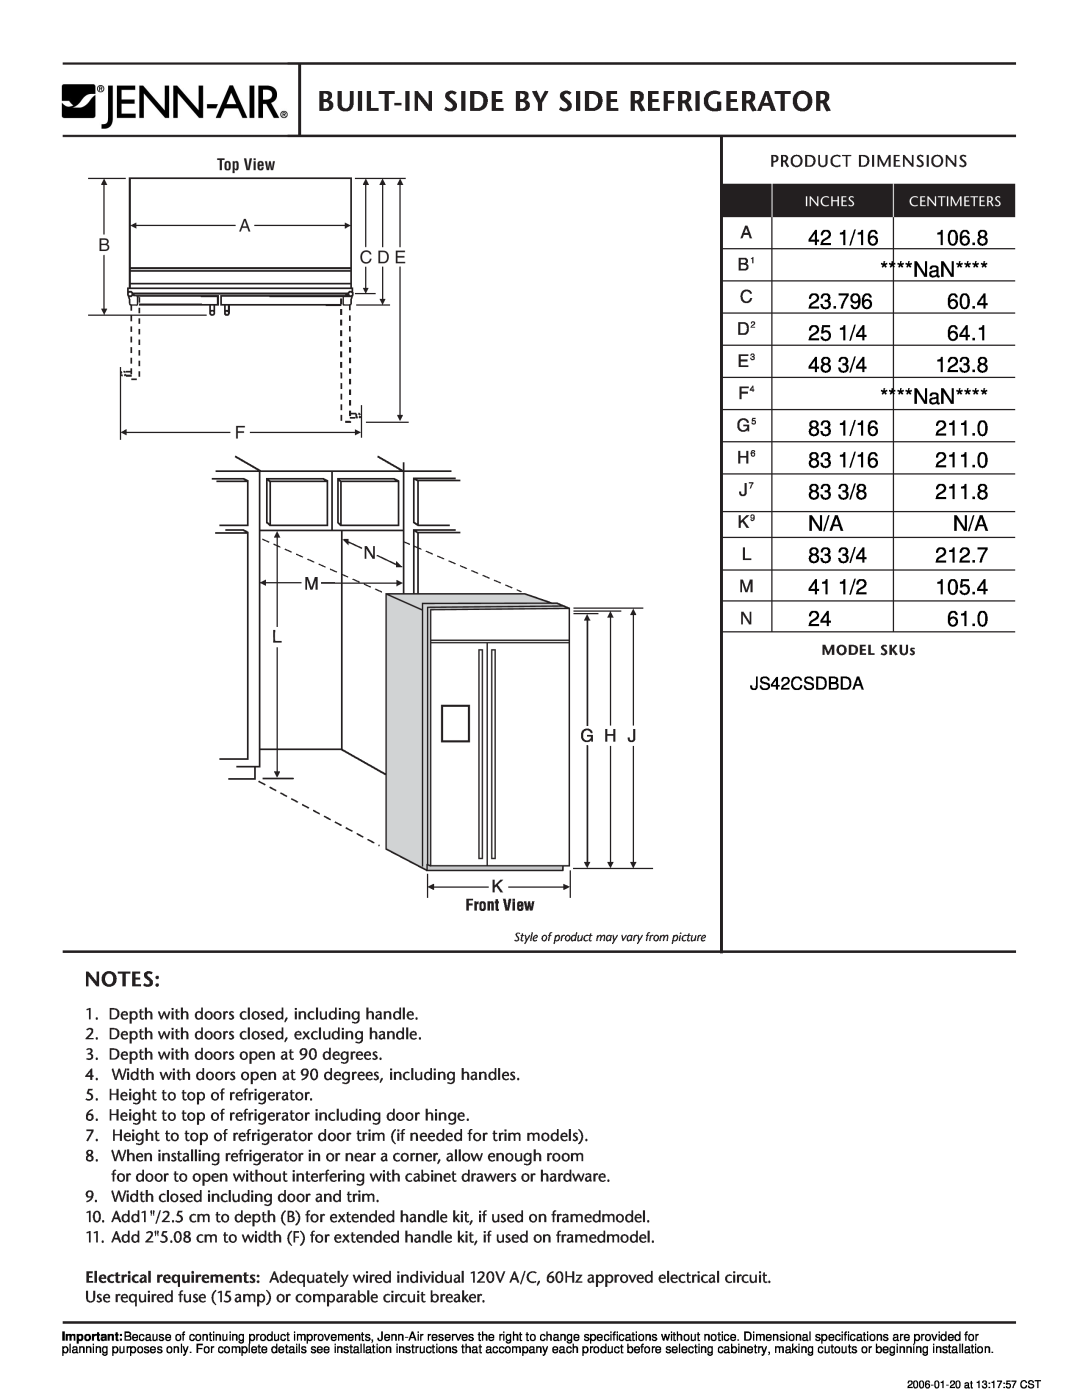 Jenn-Air JS42CSDBDA dimensions Built-In Side By Side Refrigerator, Product Dimensions 